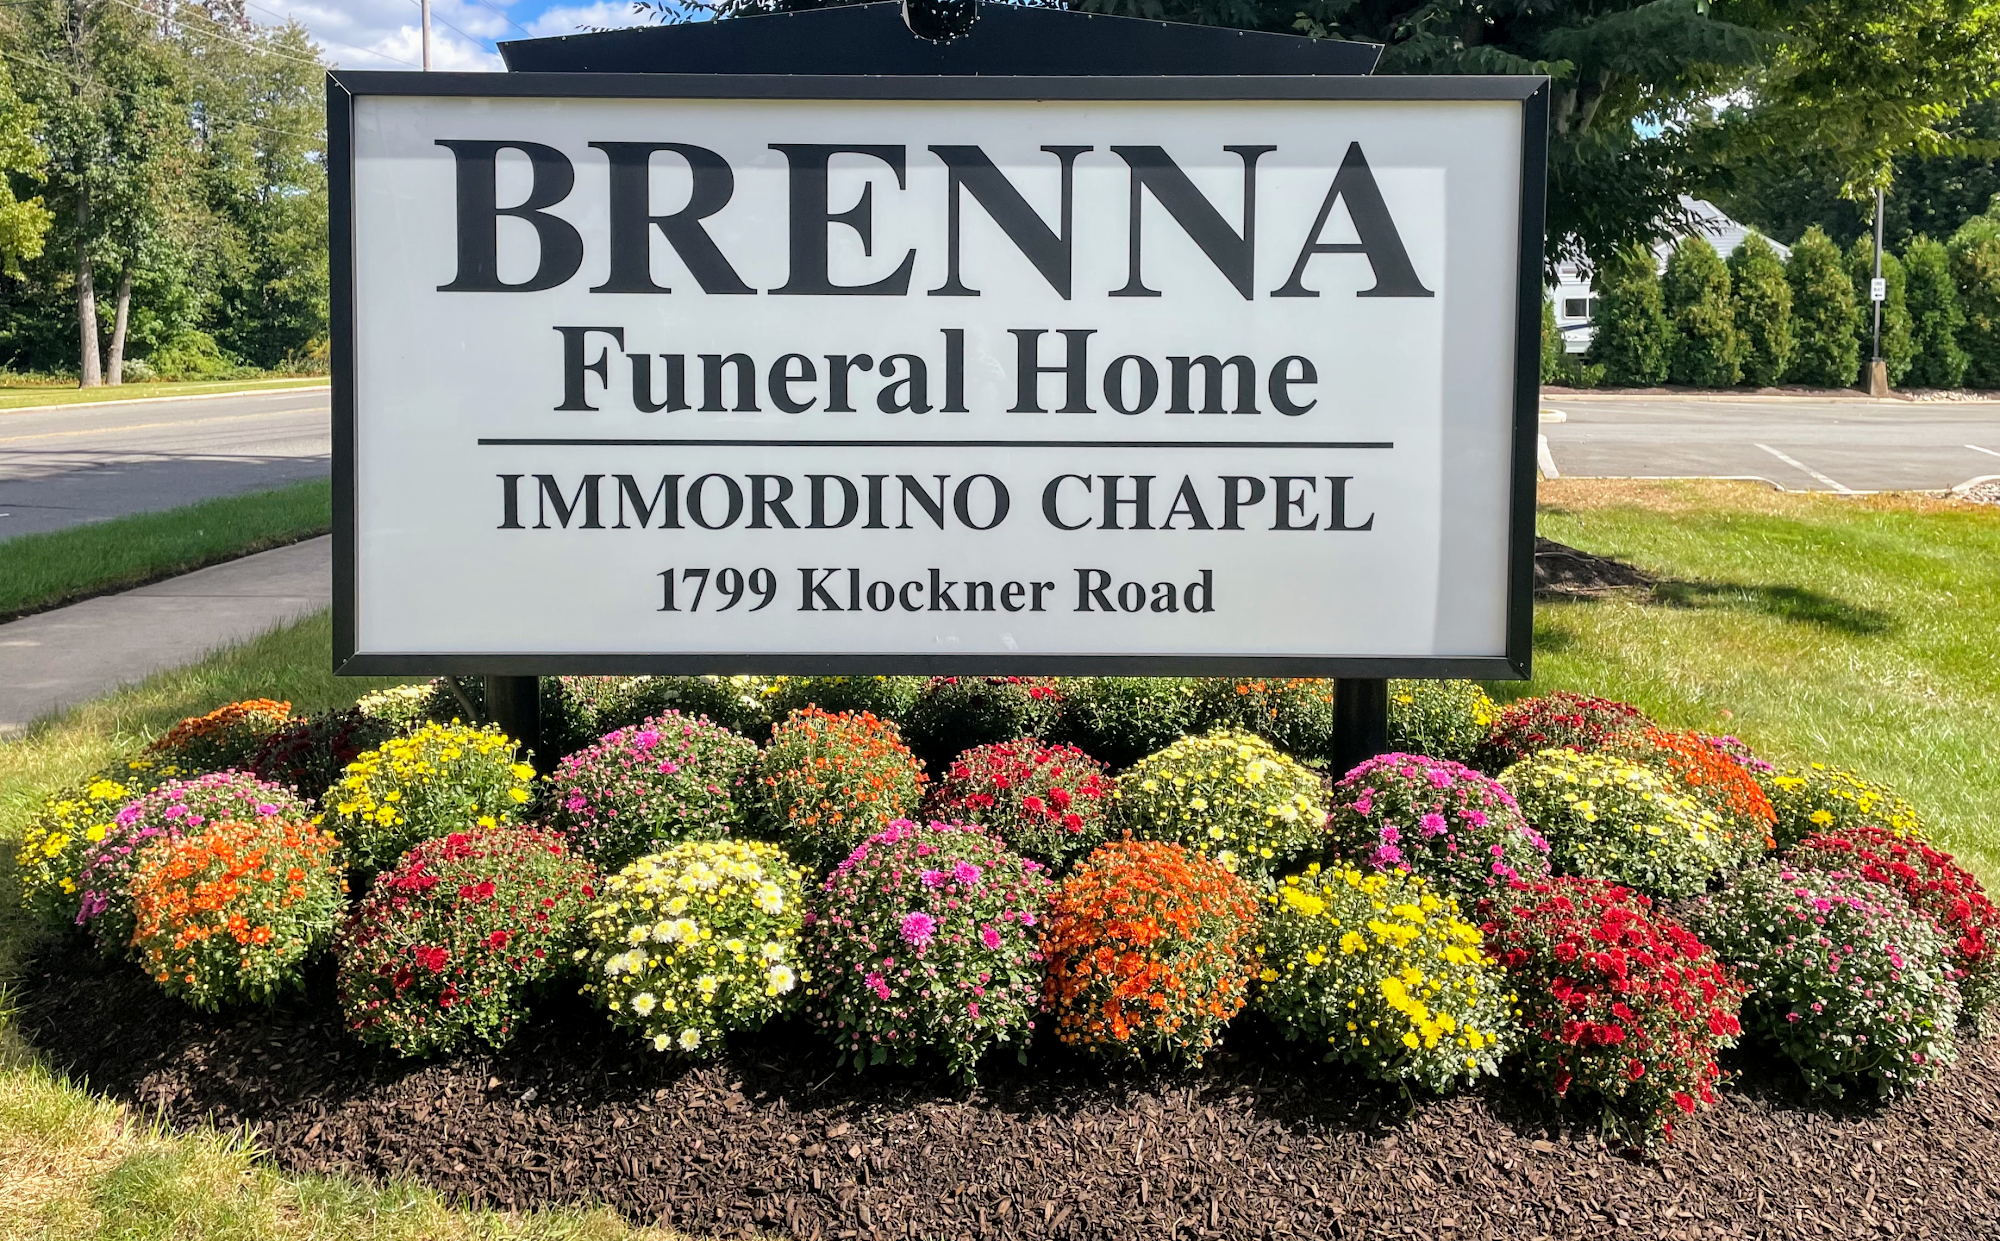 Brenna Funeral Home